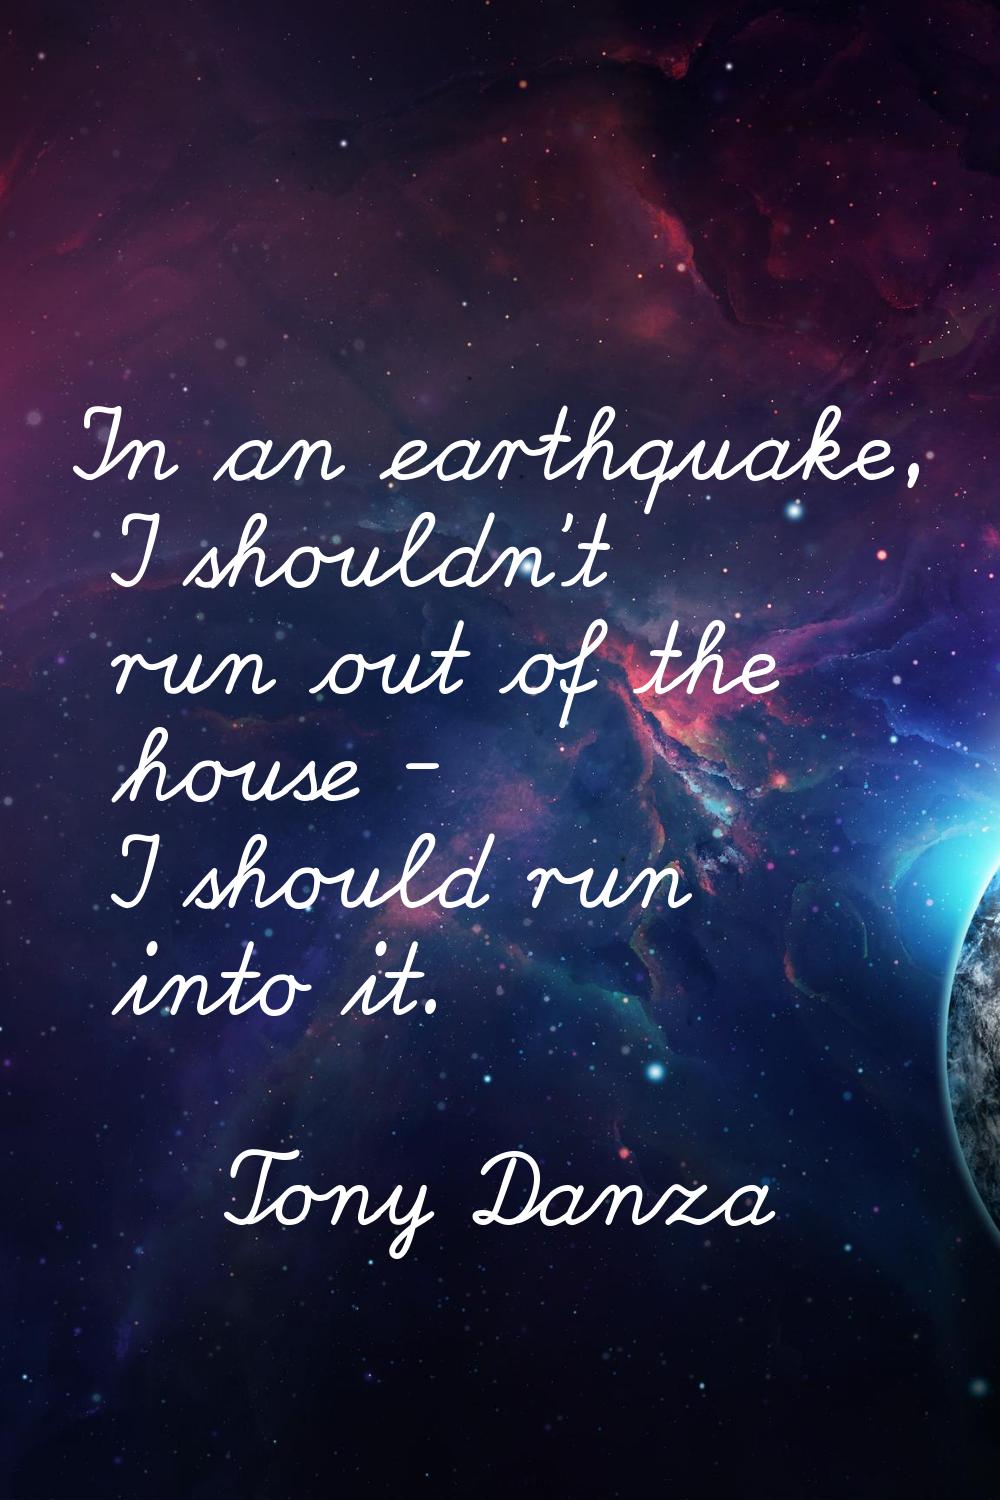 In an earthquake, I shouldn't run out of the house - I should run into it.